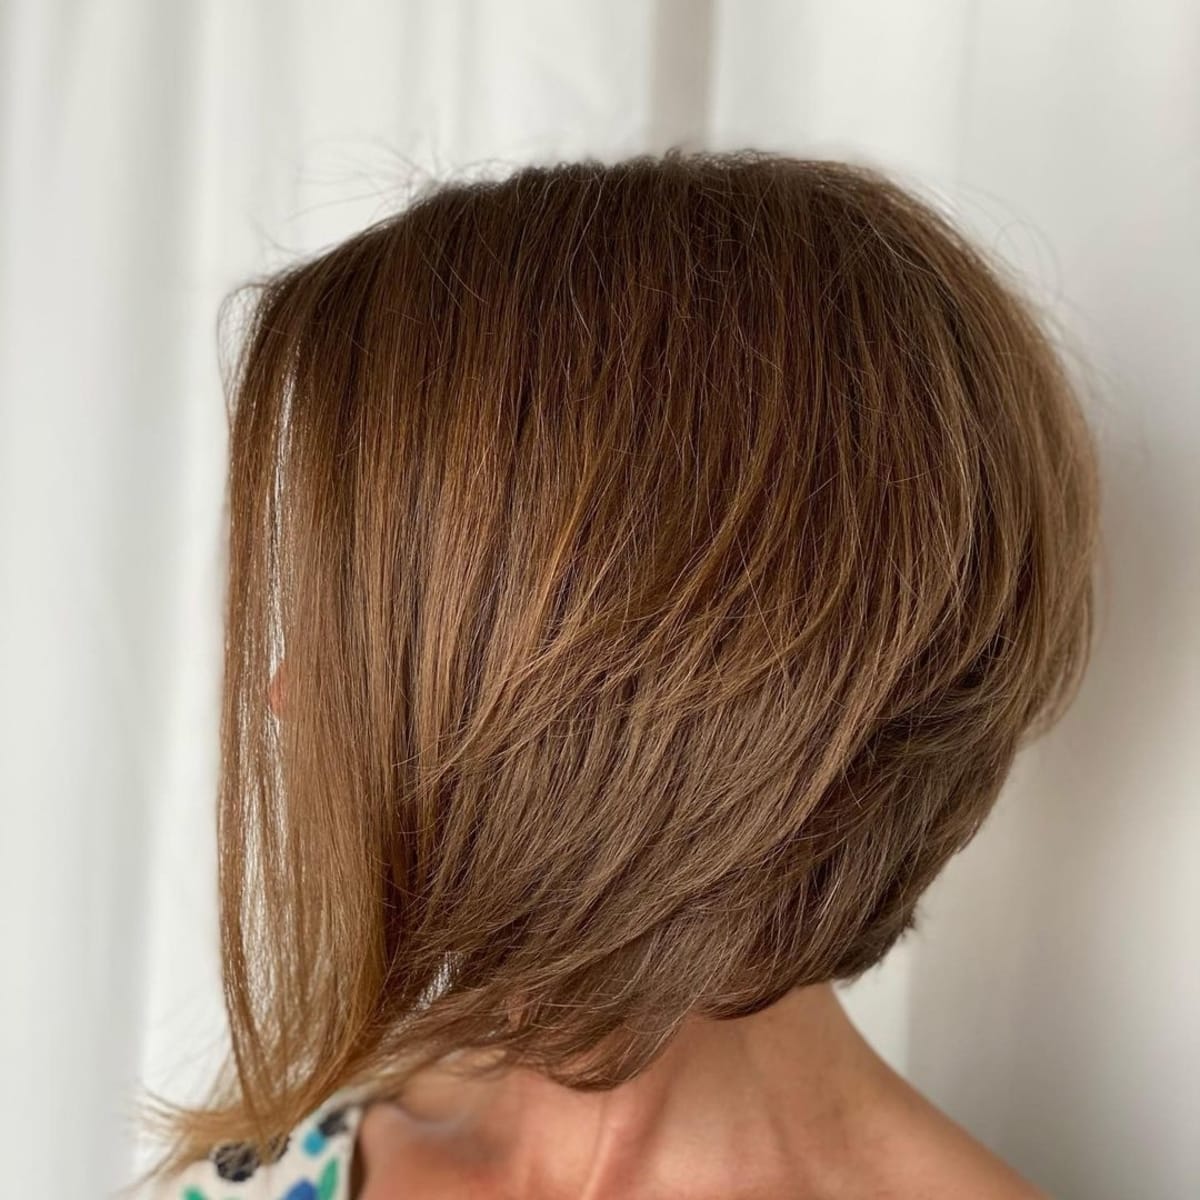 Short graduated bob with stacked layers